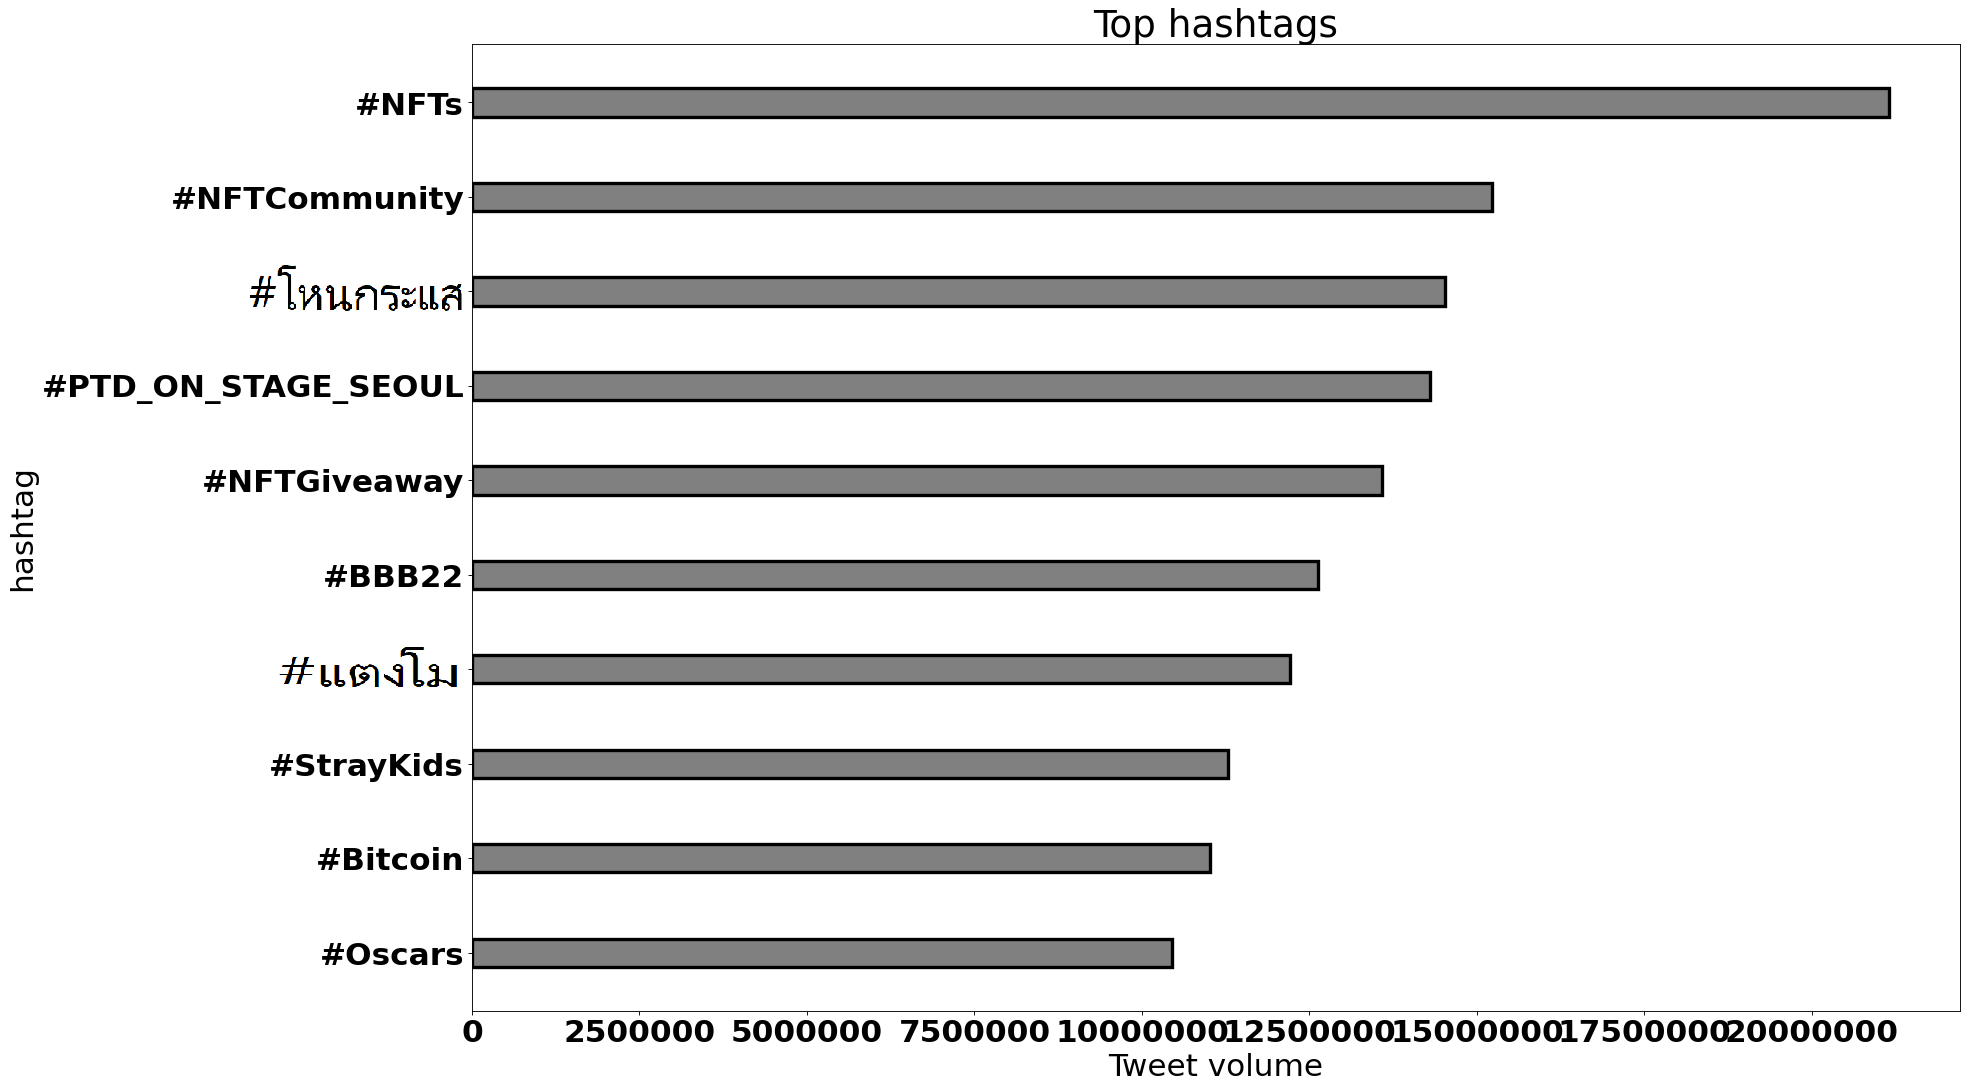 top hashtags worldwide march 2022